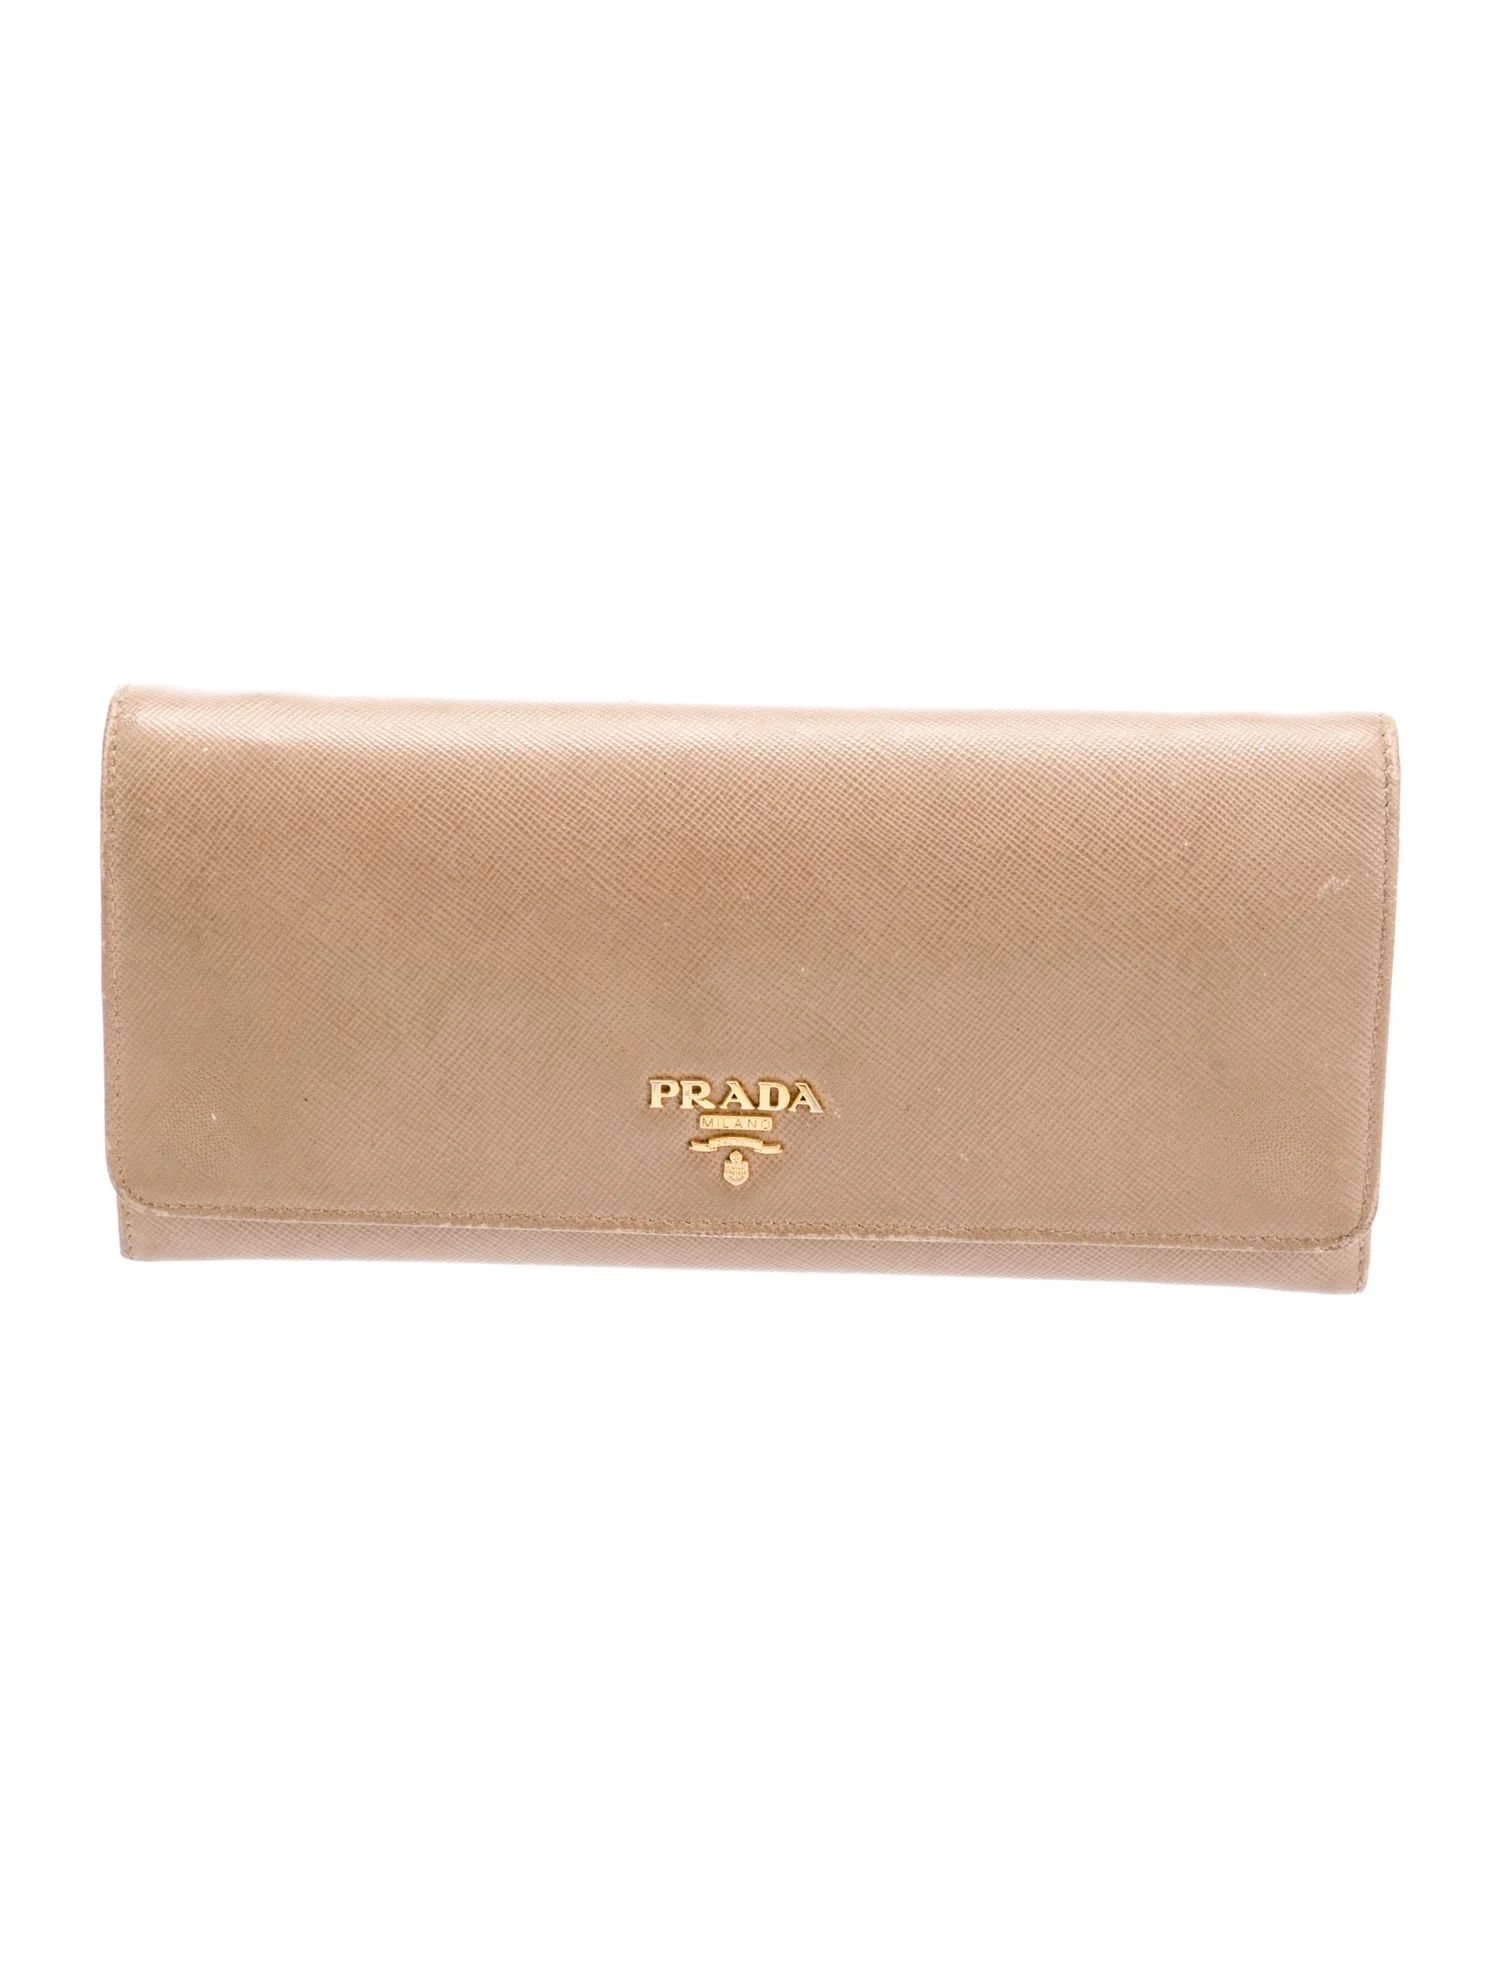 Saffiano Metal Leather Metal Clutch | The RealReal